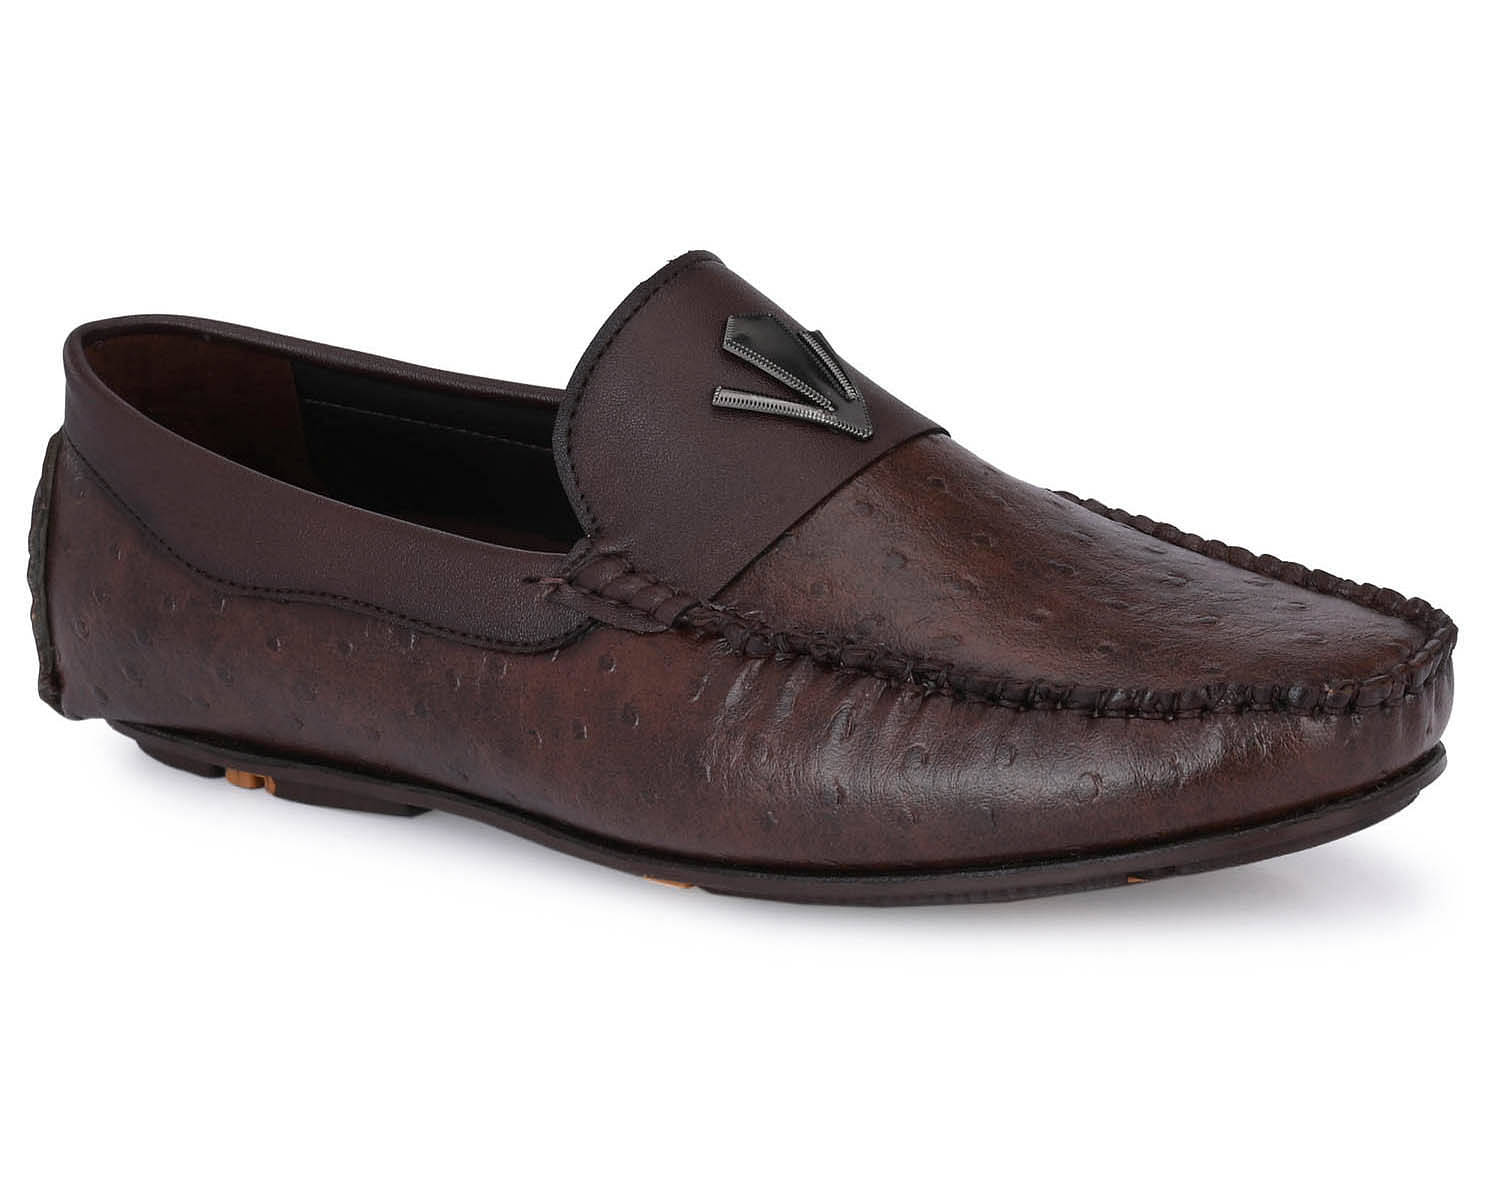 Pair-it Men's Loafers Shoes - KF-Loafer 119 - Brown